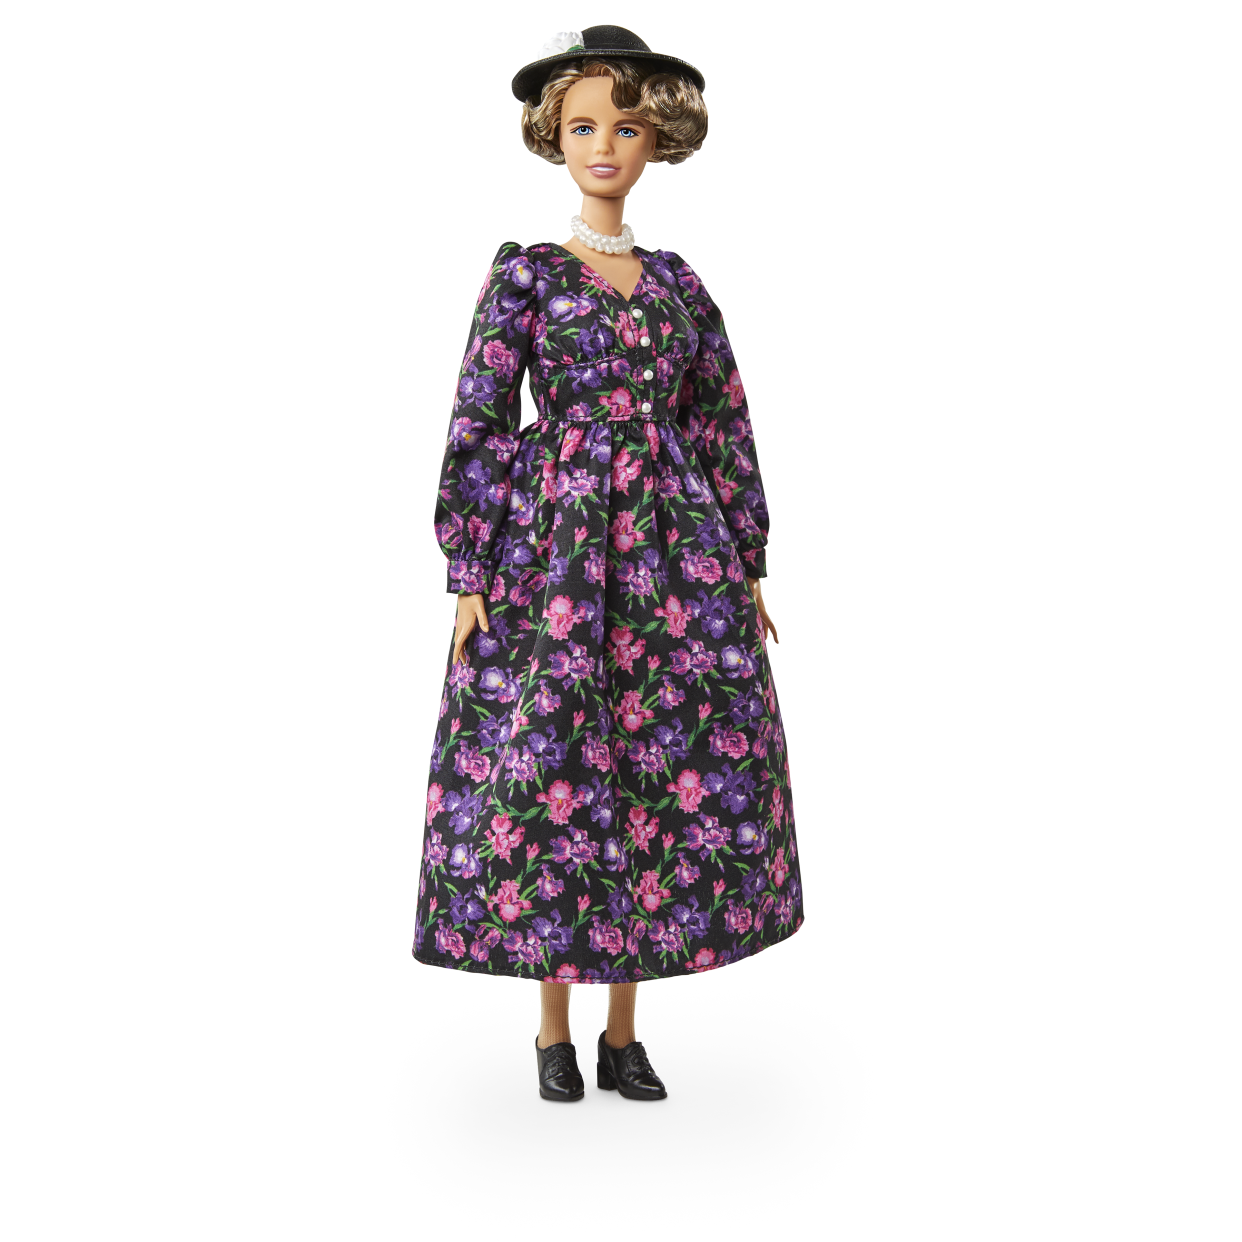 "The dress doesn’t make her look like toothpick! And [the hat] looks like one of the hats she wore," notes historian Allida Black. (Photo: Mattel)